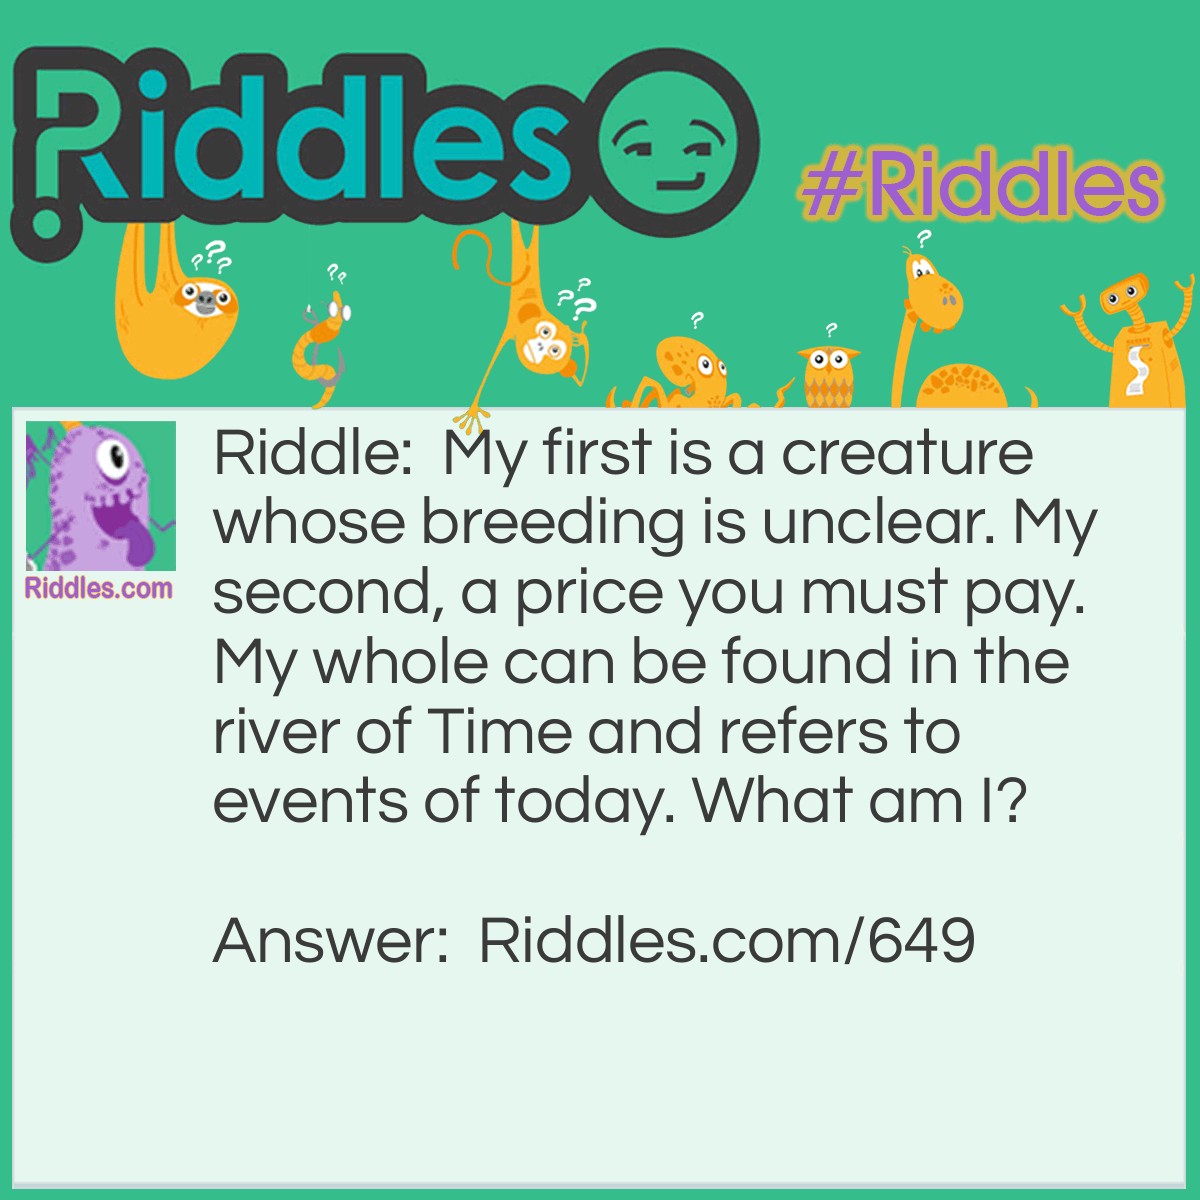 Riddle: My first is a creature whose breeding is unclear. My second, a price you must pay. My whole can be found in the river of Time and refers to events of today. What am I? Answer: Current.